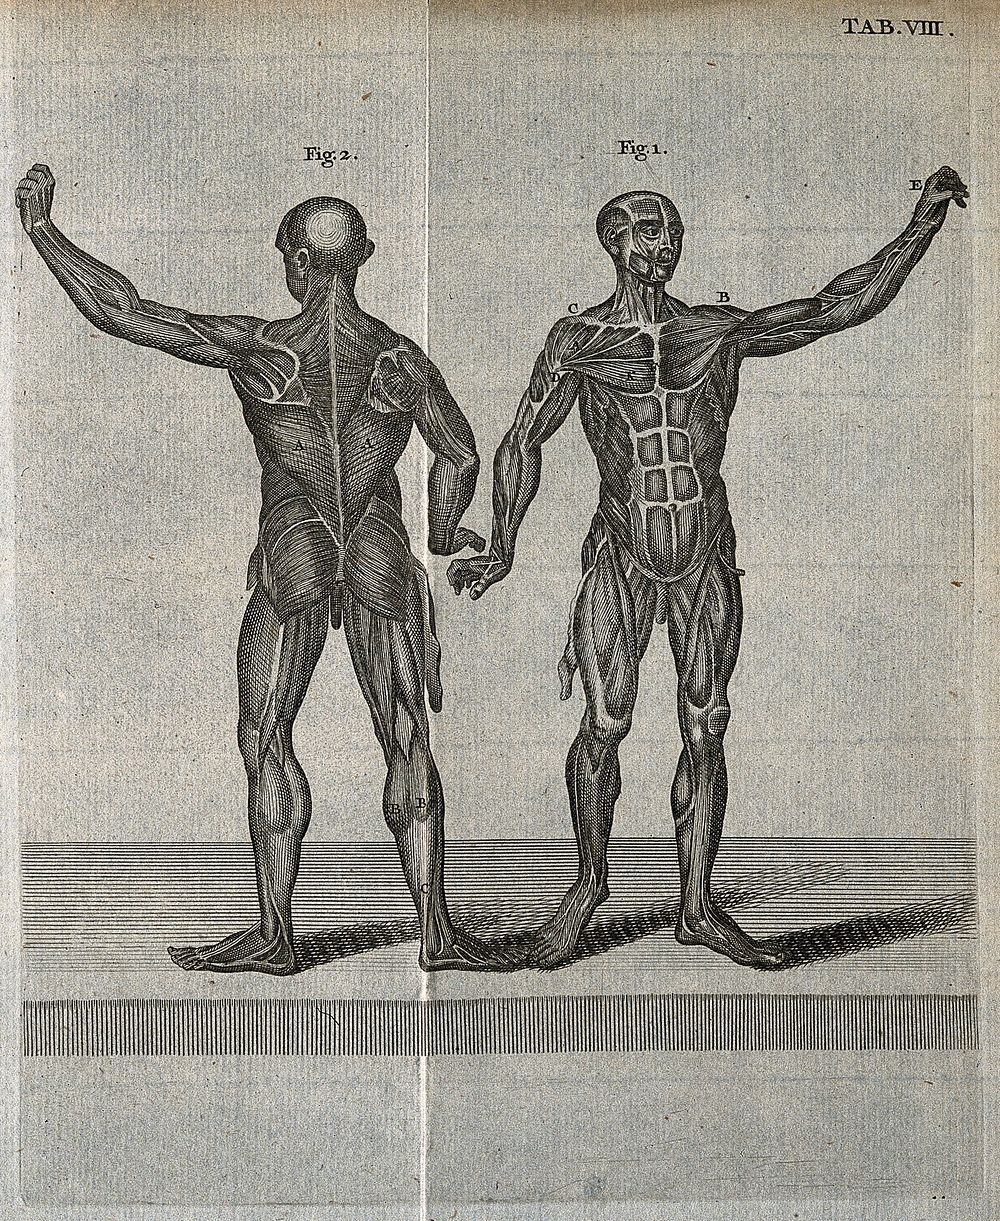 Two musclemen, viewed from the front and from the back. Engraving, 18th century.